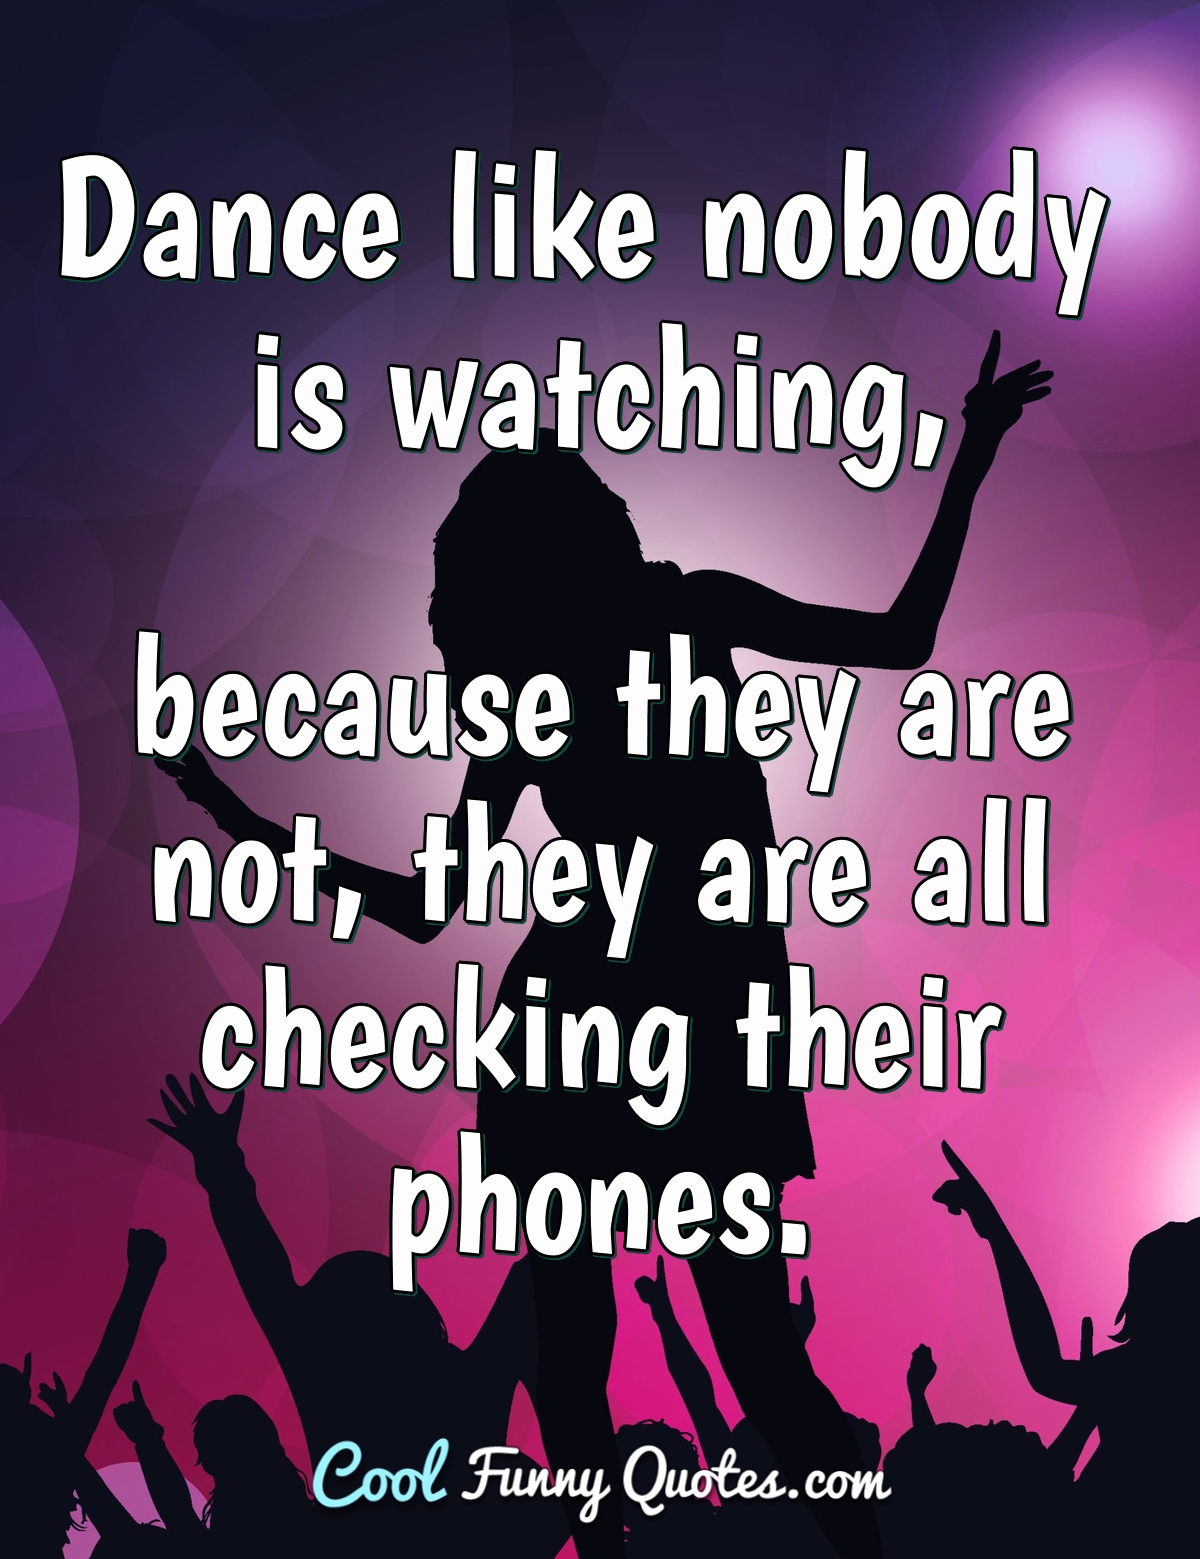 tf-dance-like-nobody-is-watching-because-they